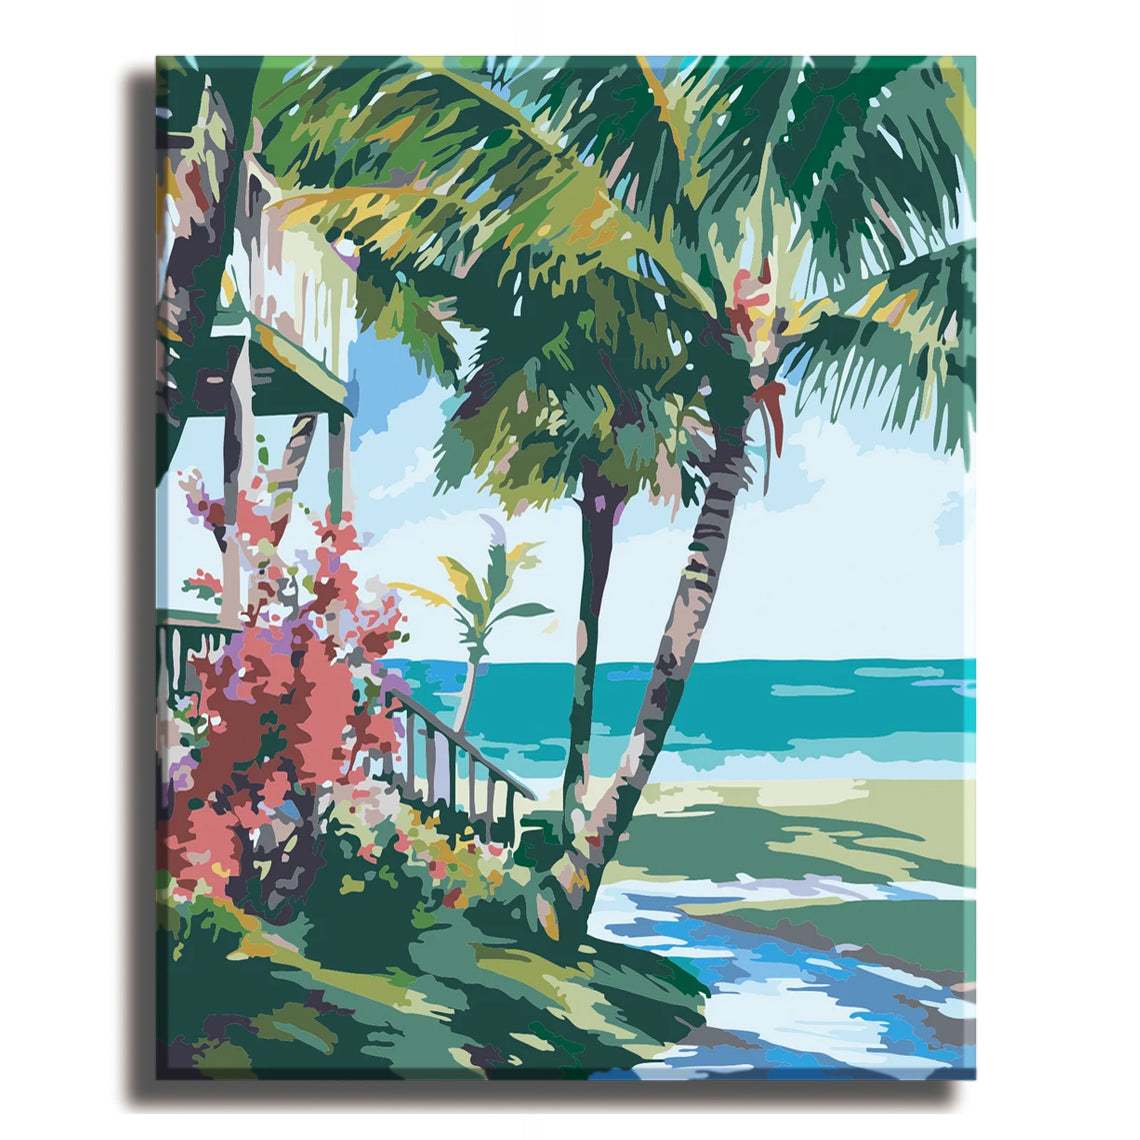 Vacation Beach, Paint by numbers kit